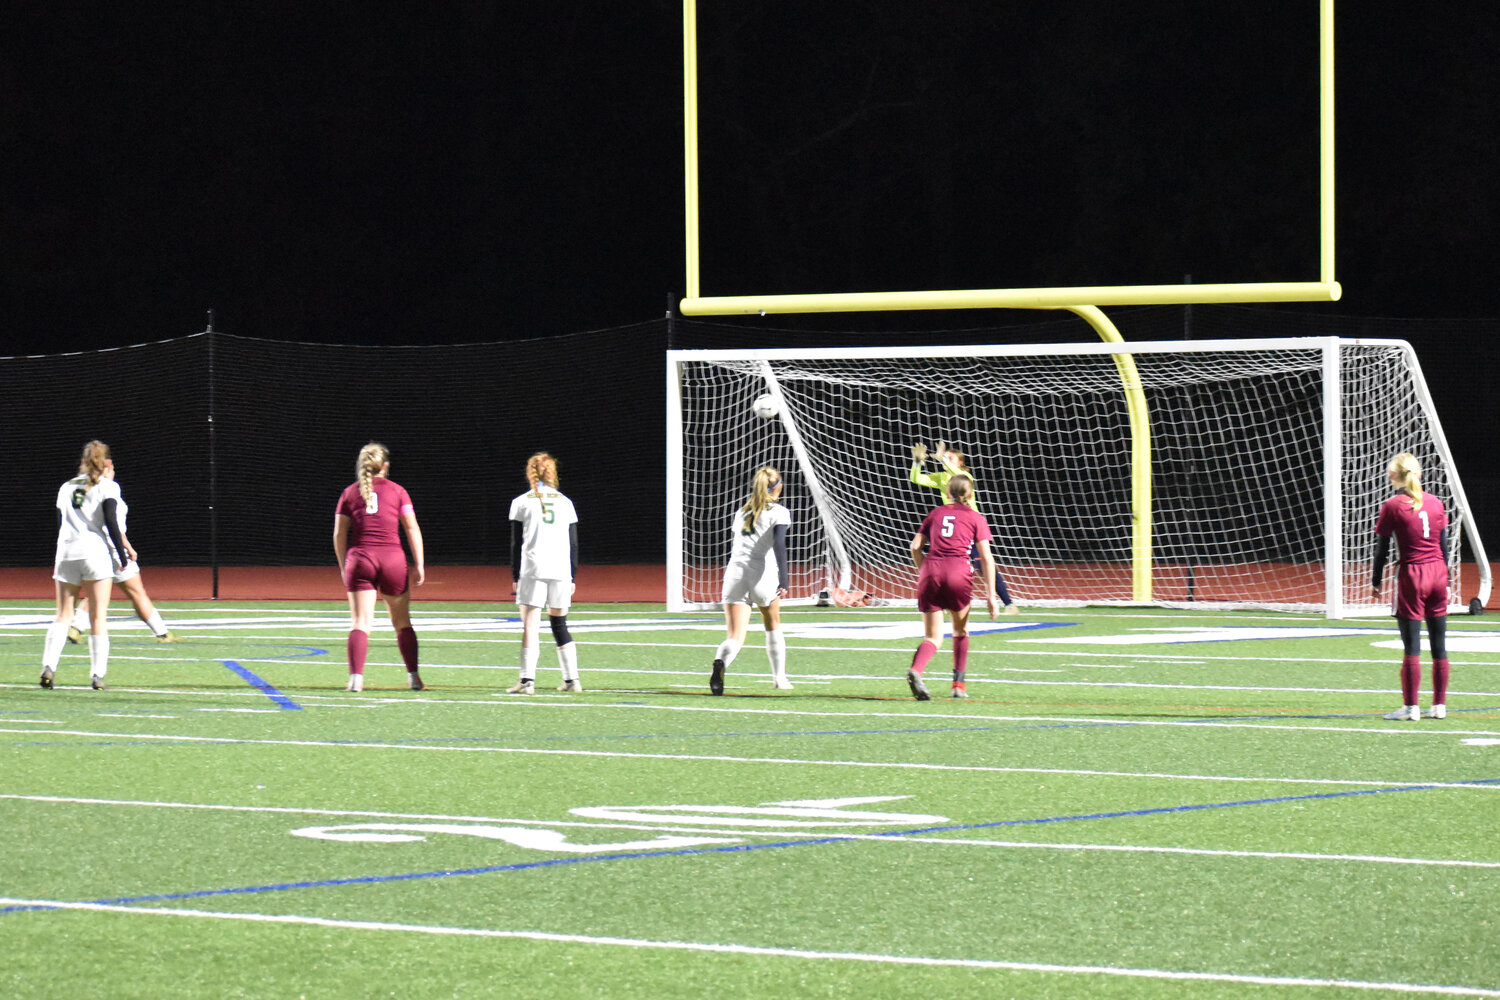 Ksenia Sosnowski sails a second penalty kick over the goal after shooting to early on her first attempt.